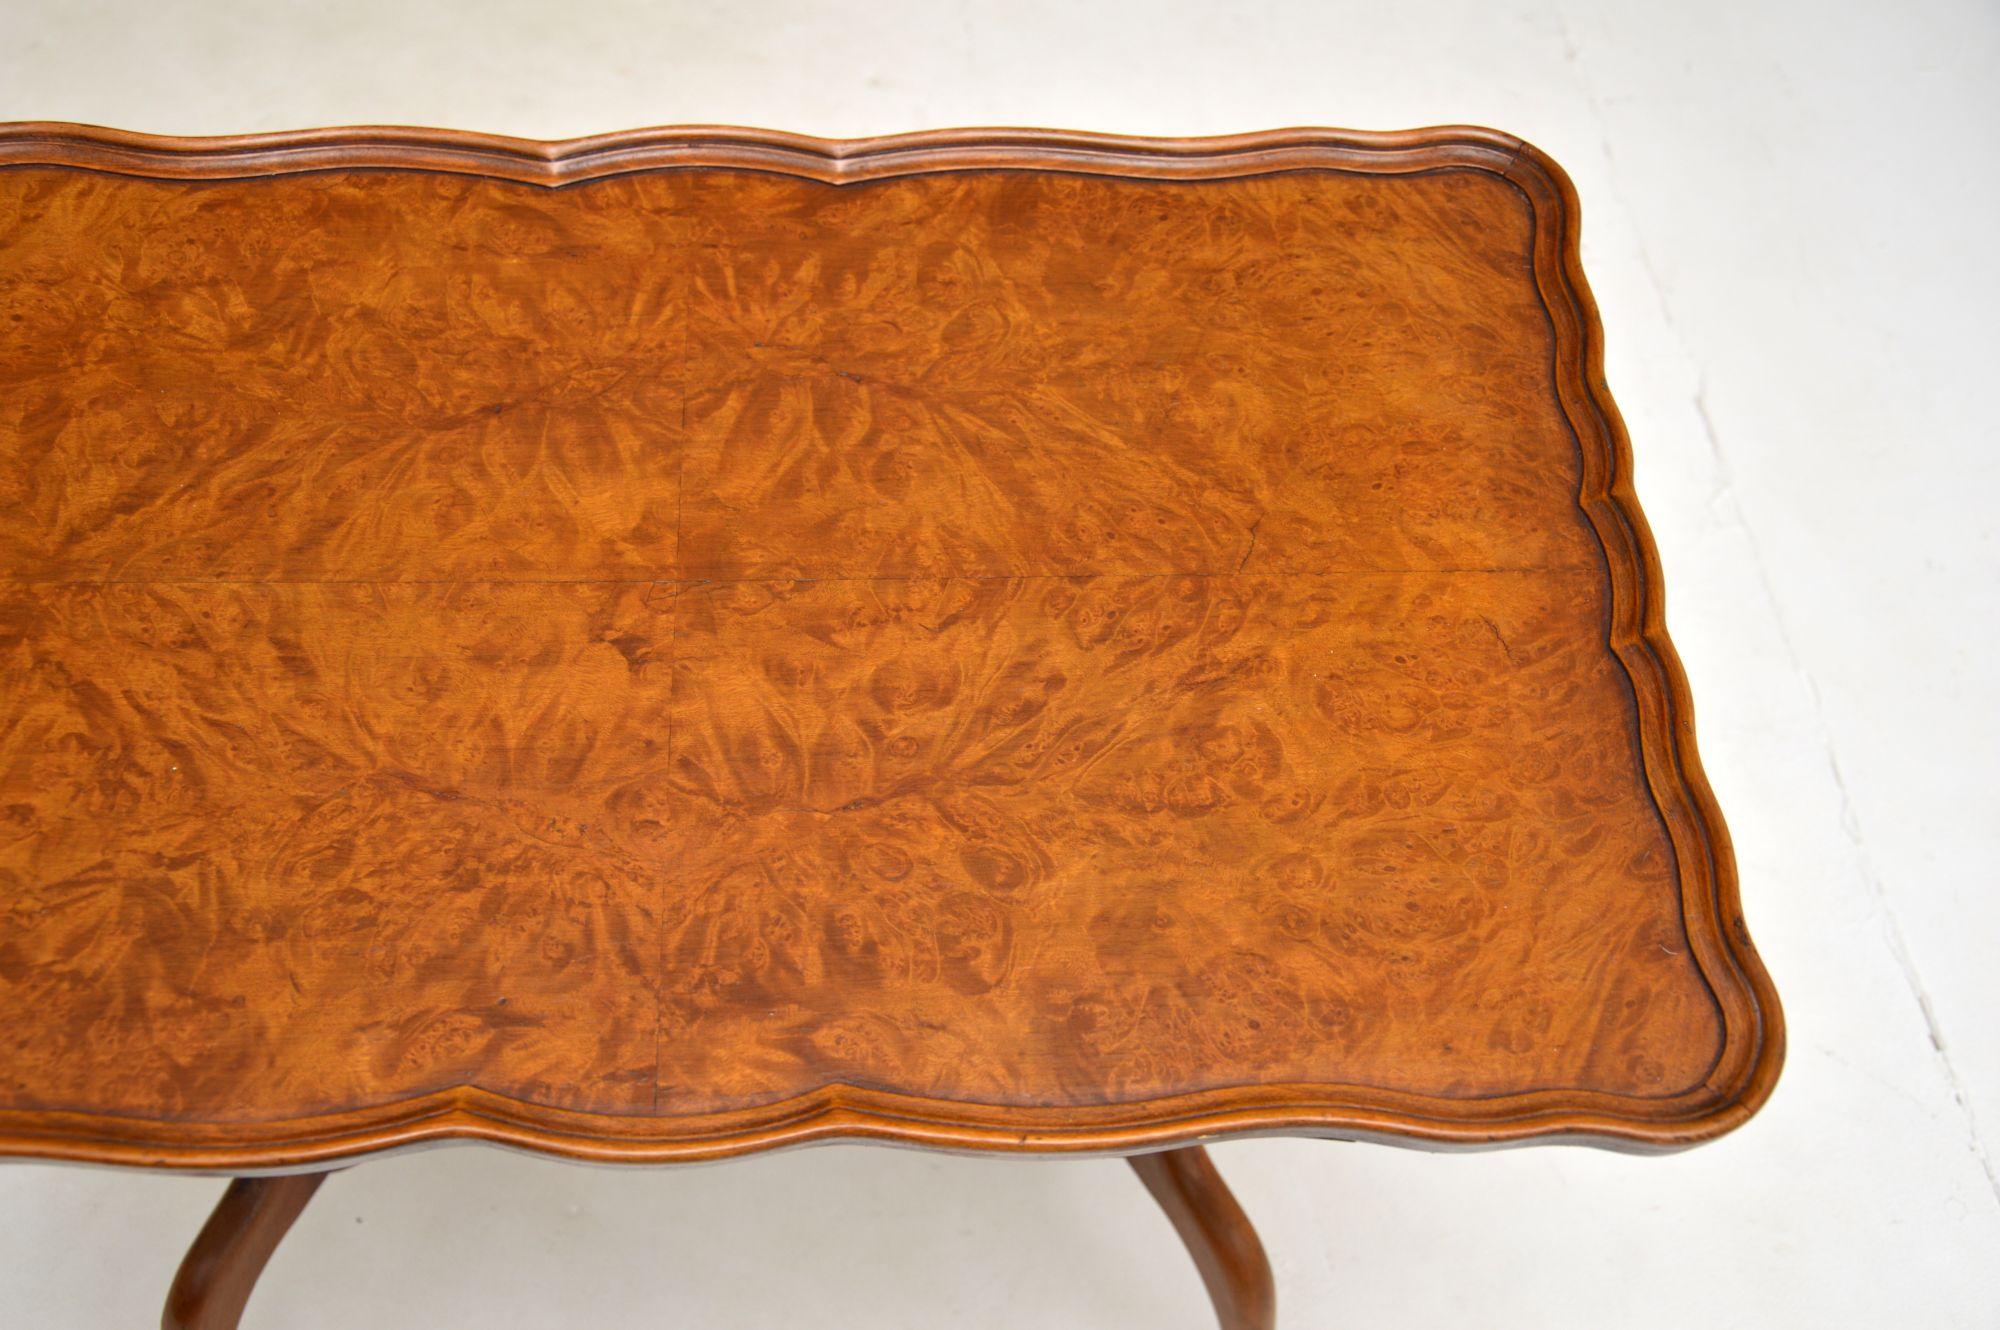 Mid-20th Century Antique Burr Walnut Pie Crust Coffee / Side Table For Sale